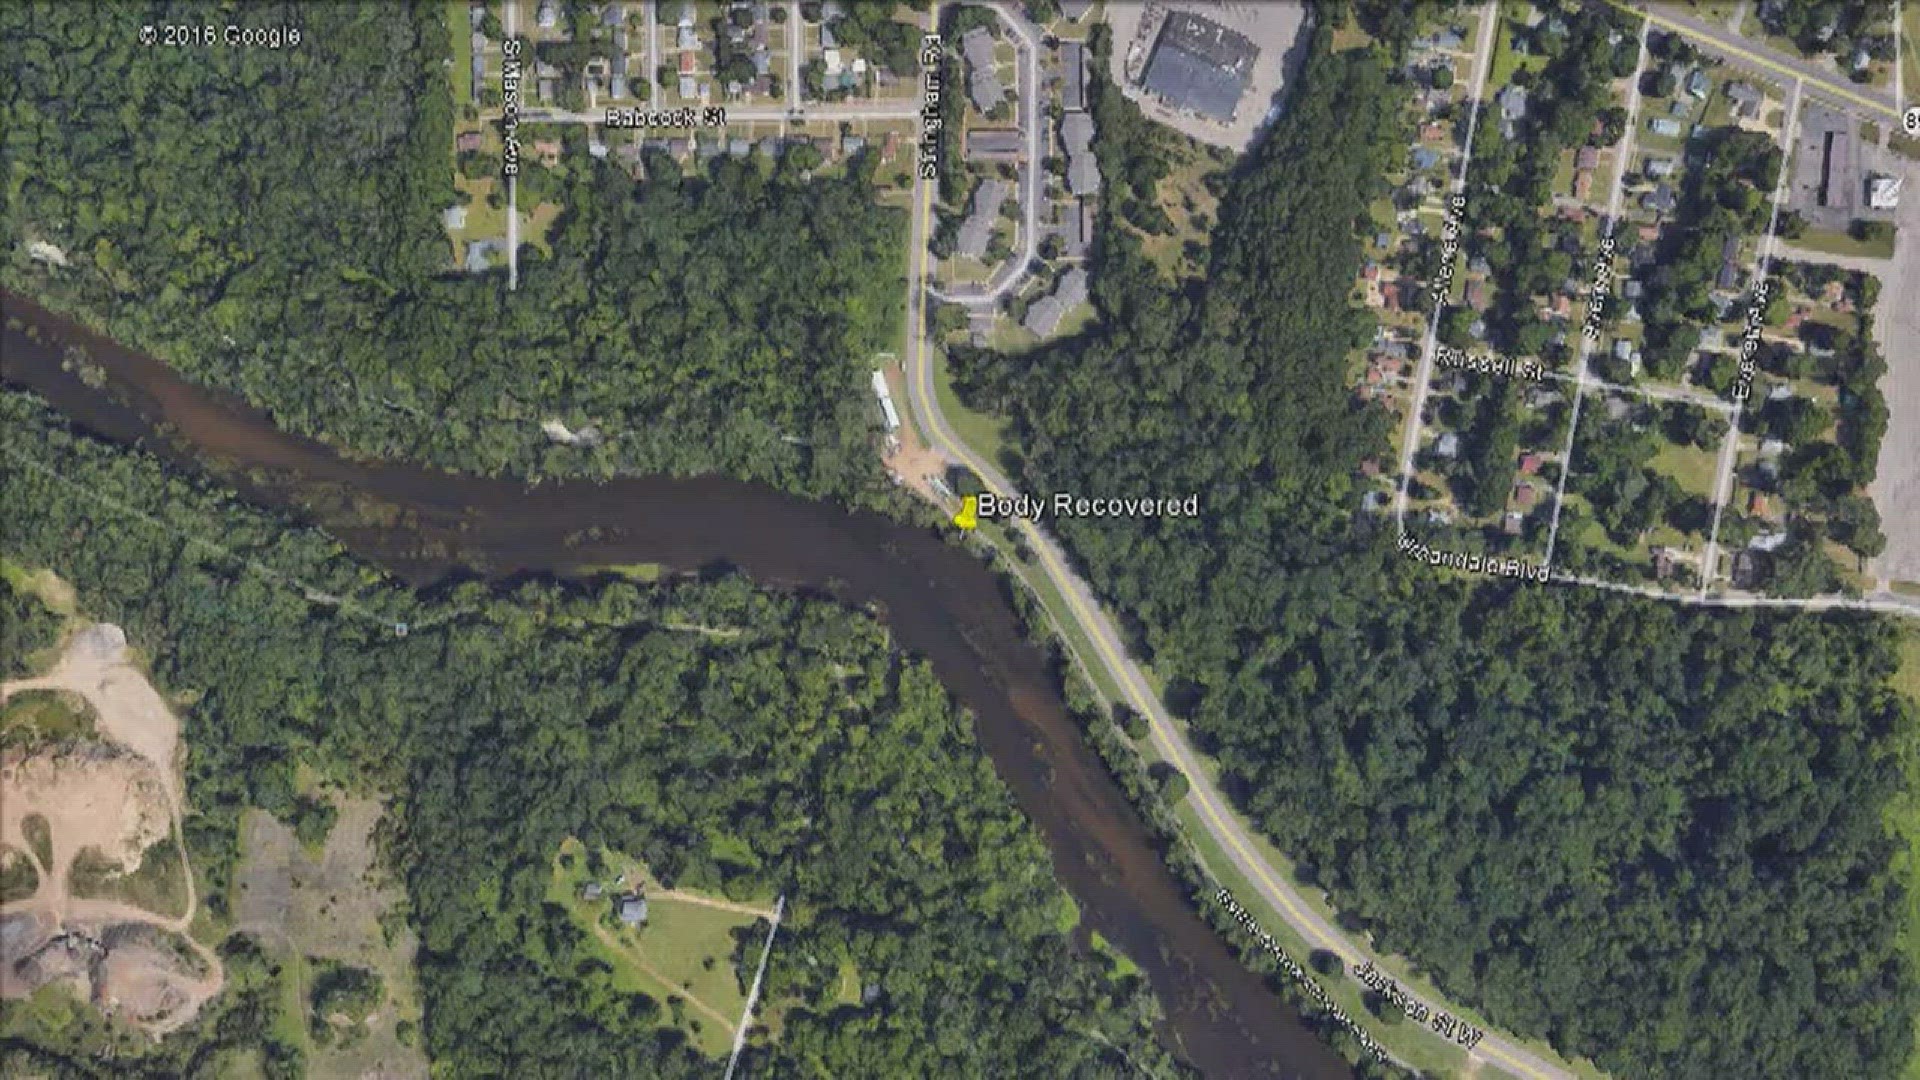 Authorities located body in KZOO River